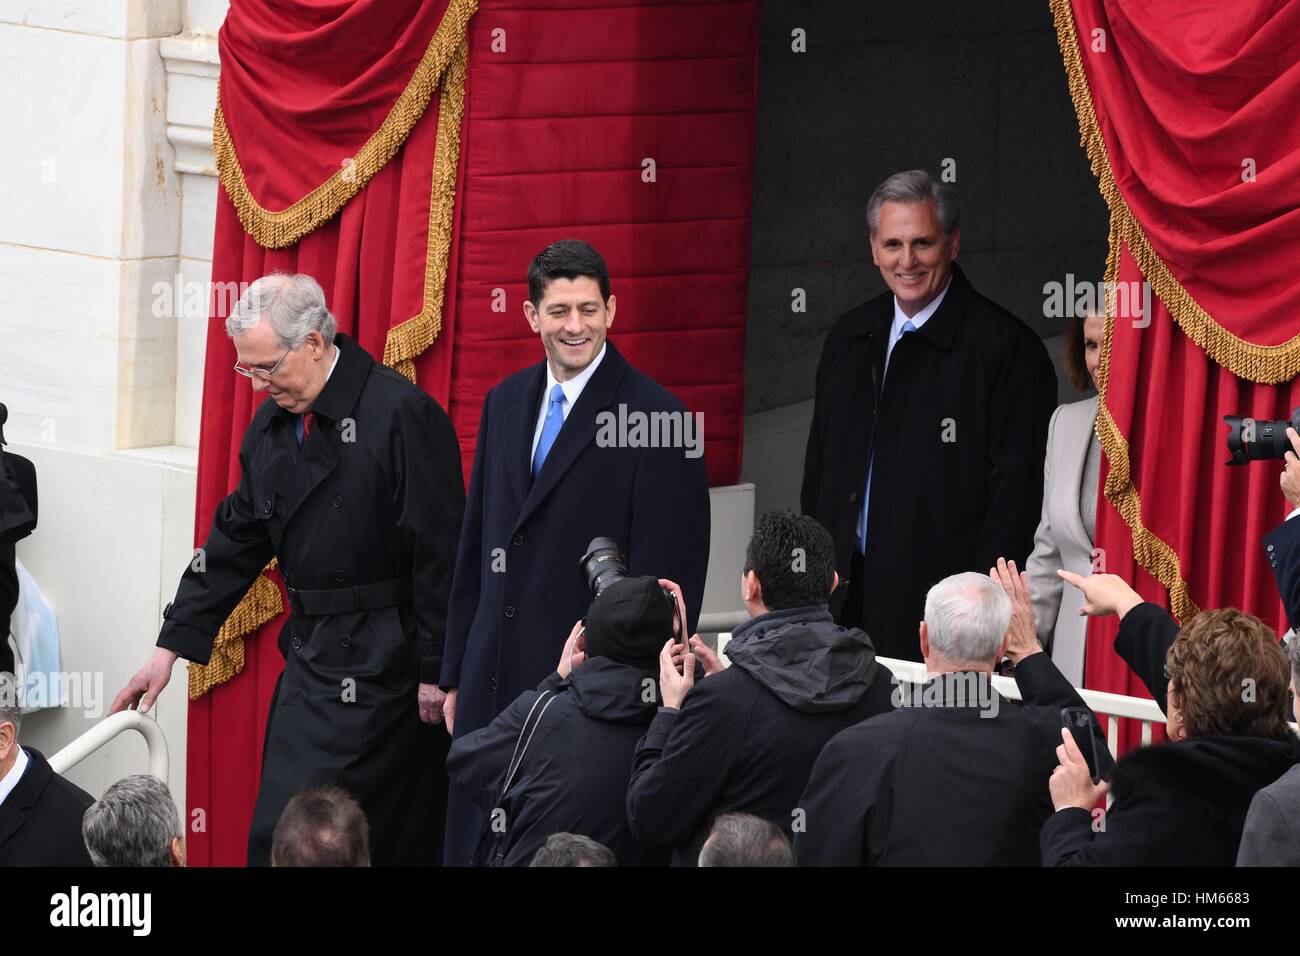 U.S. Senate Majority Leader Mitch McConnell, left, walks  out from the the U.S. Capitol Building with House Speaker Paul Ryan and House Majority Leader Kevin McCarthy, right, for the Inaugural Ceremony of the 45th President January 20, 2017 in Washington, DC. Stock Photo